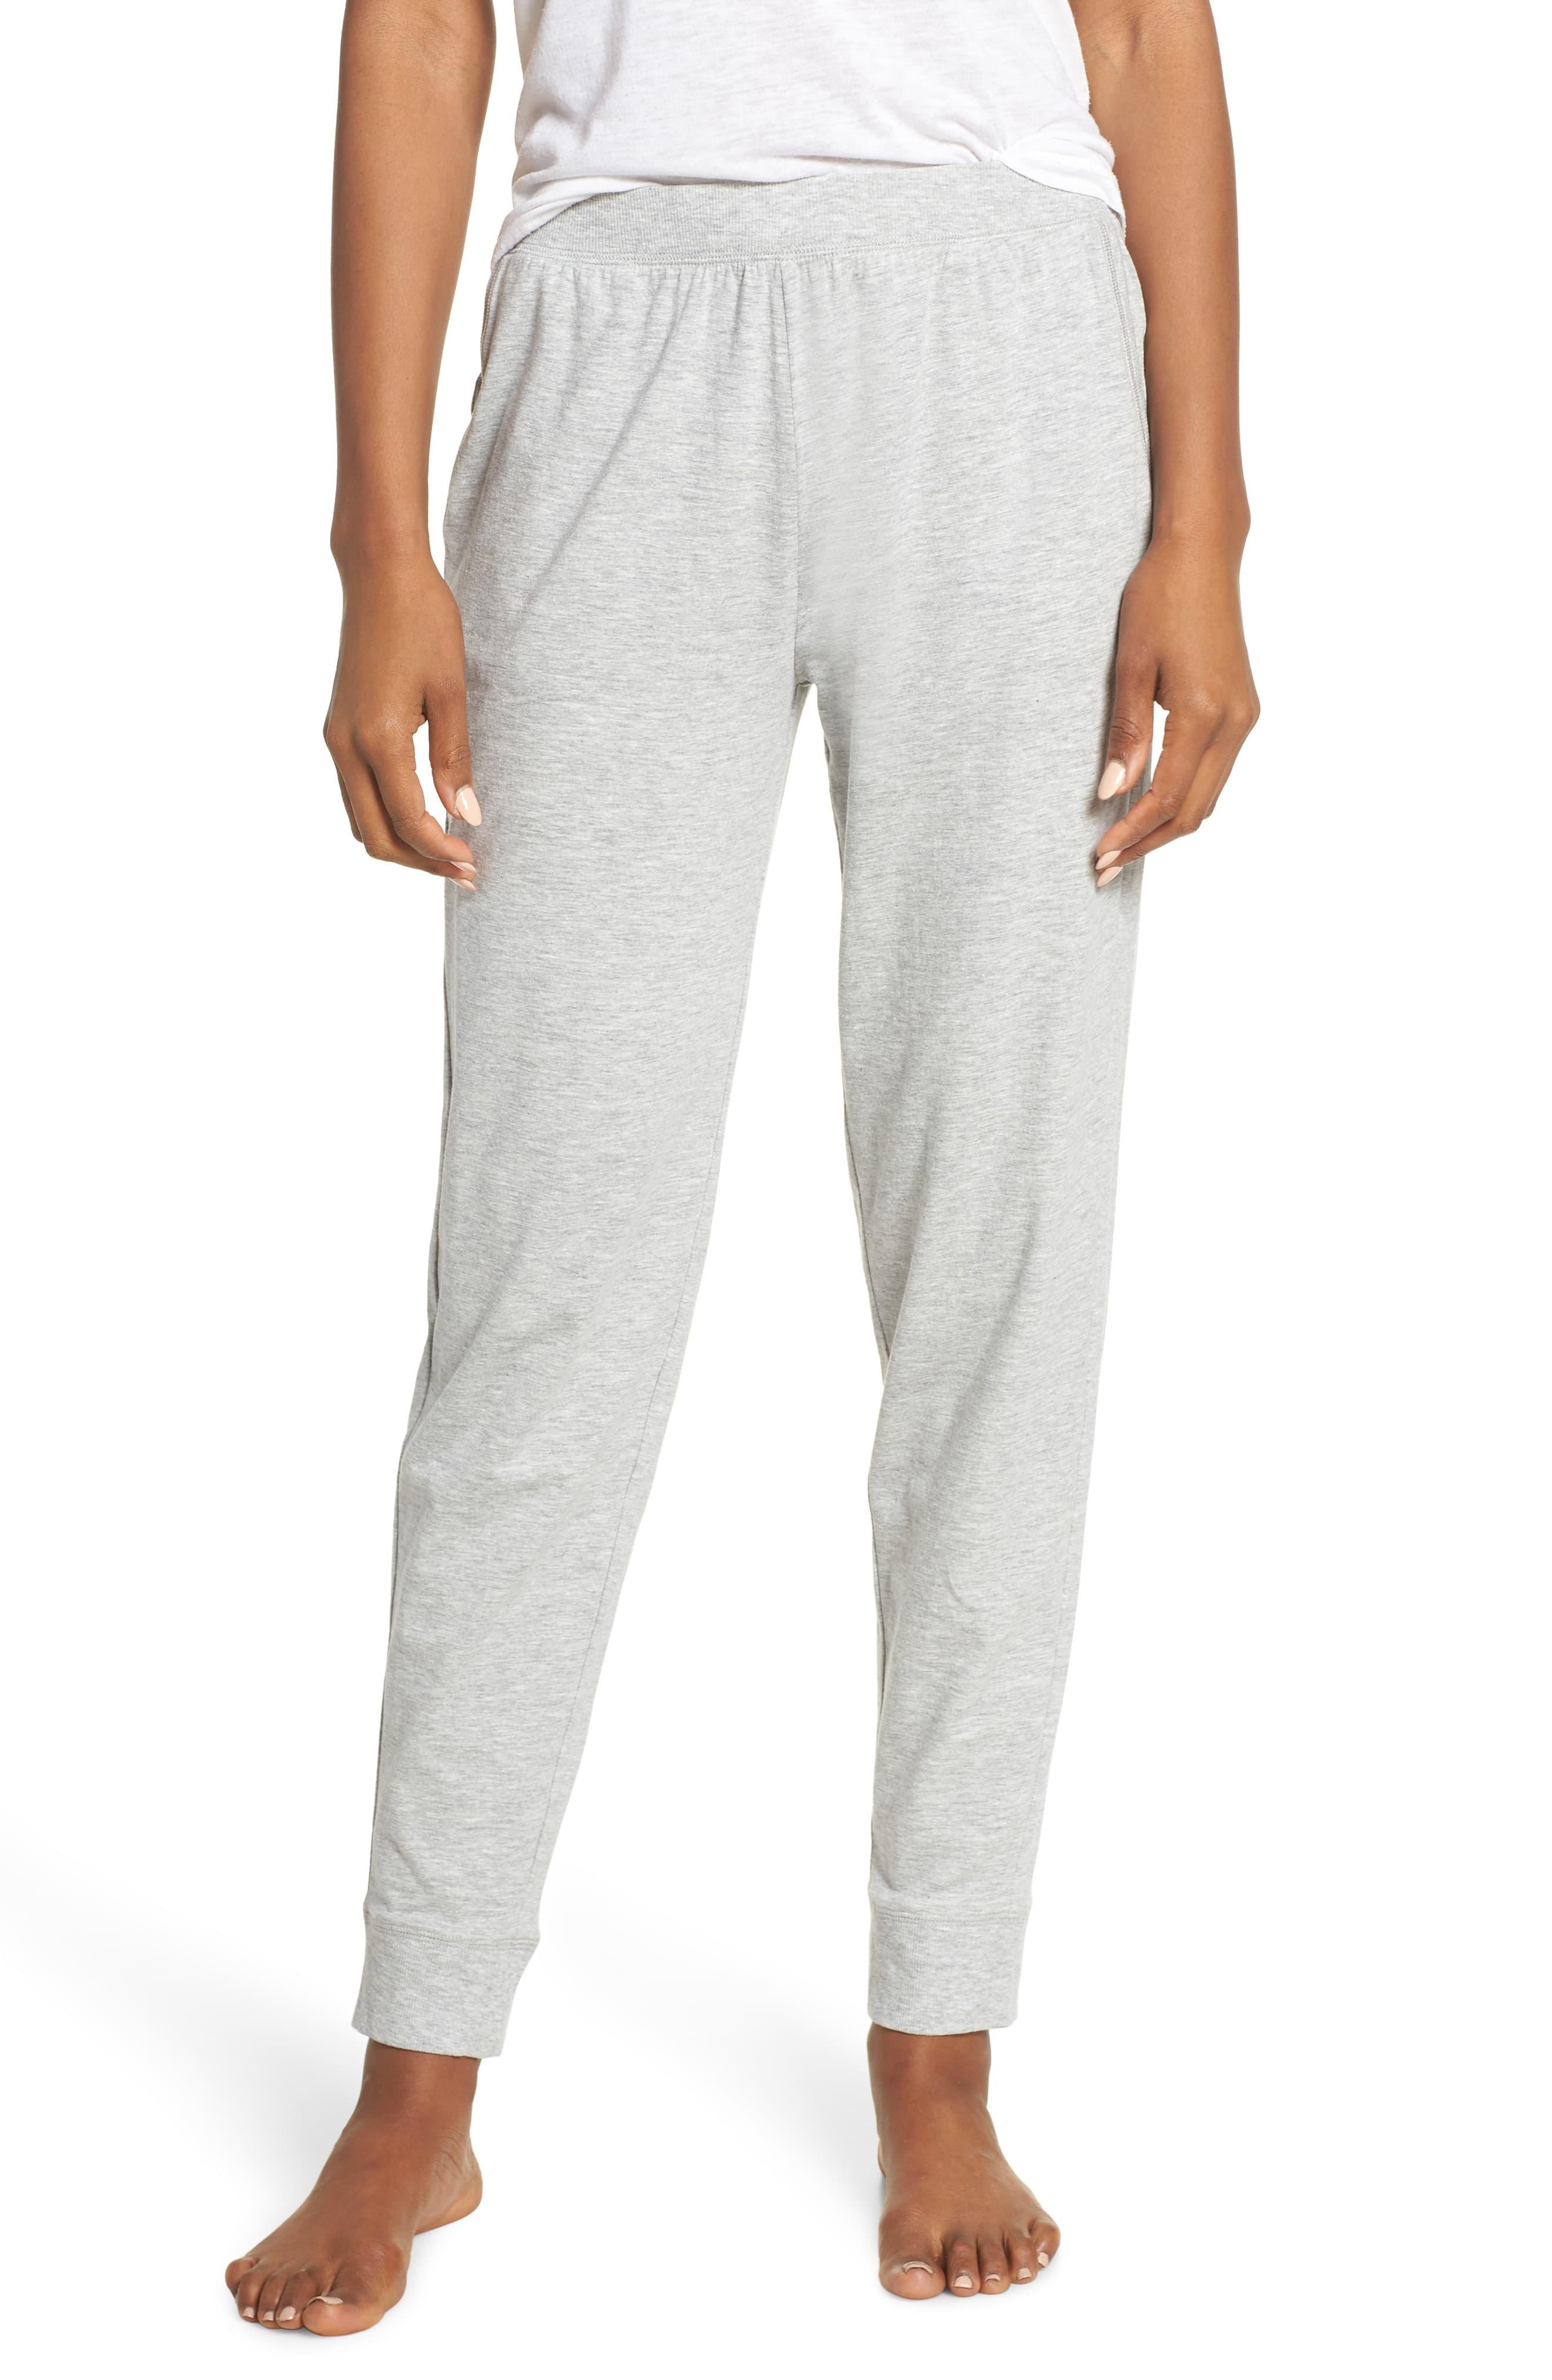 Naked Quintessential Pajama Pants in Gray - Lyst